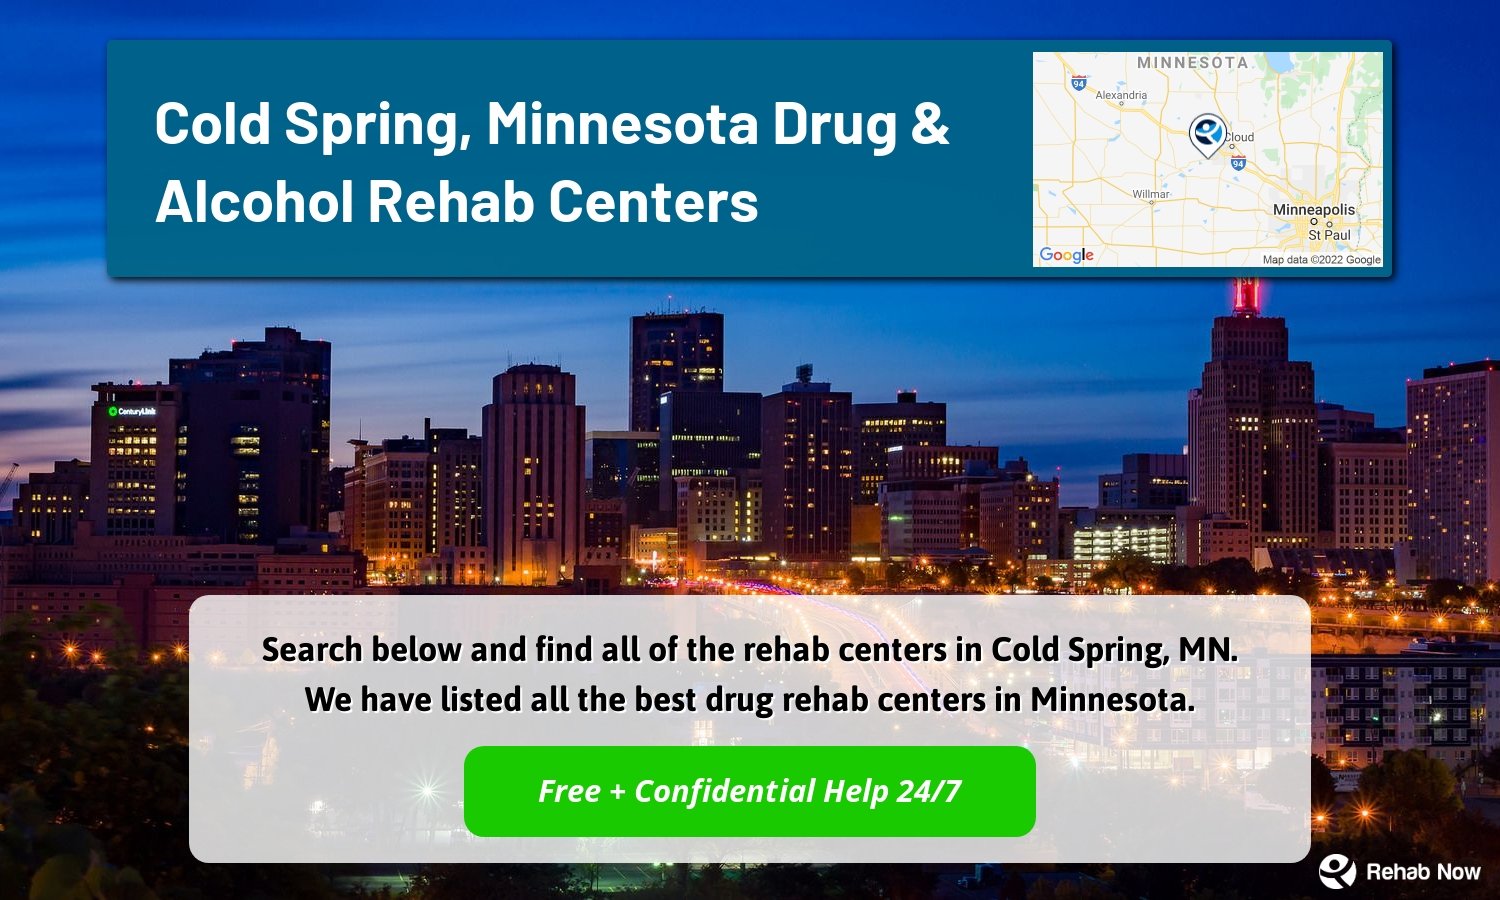 Search below and find all of the rehab centers in Cold Spring, MN. We have listed all the best drug rehab centers in Minnesota.